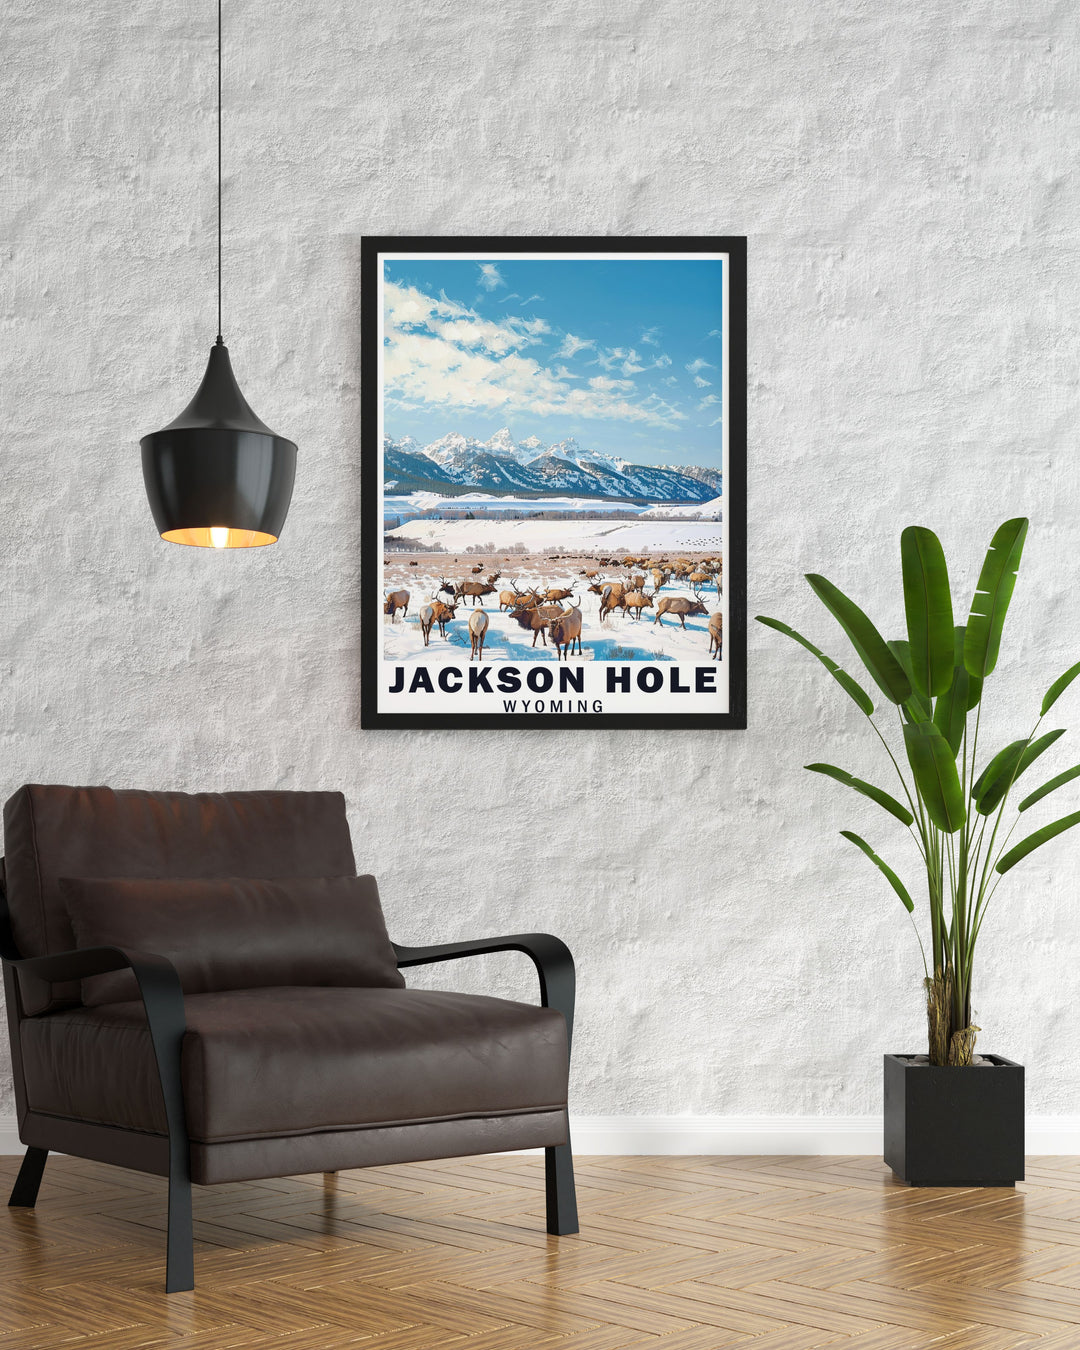 Featuring the tranquil valleys of Jackson Hole and the wildlife rich National Elk Refuge, this poster adds a touch of Wyomings natural splendor to any space.